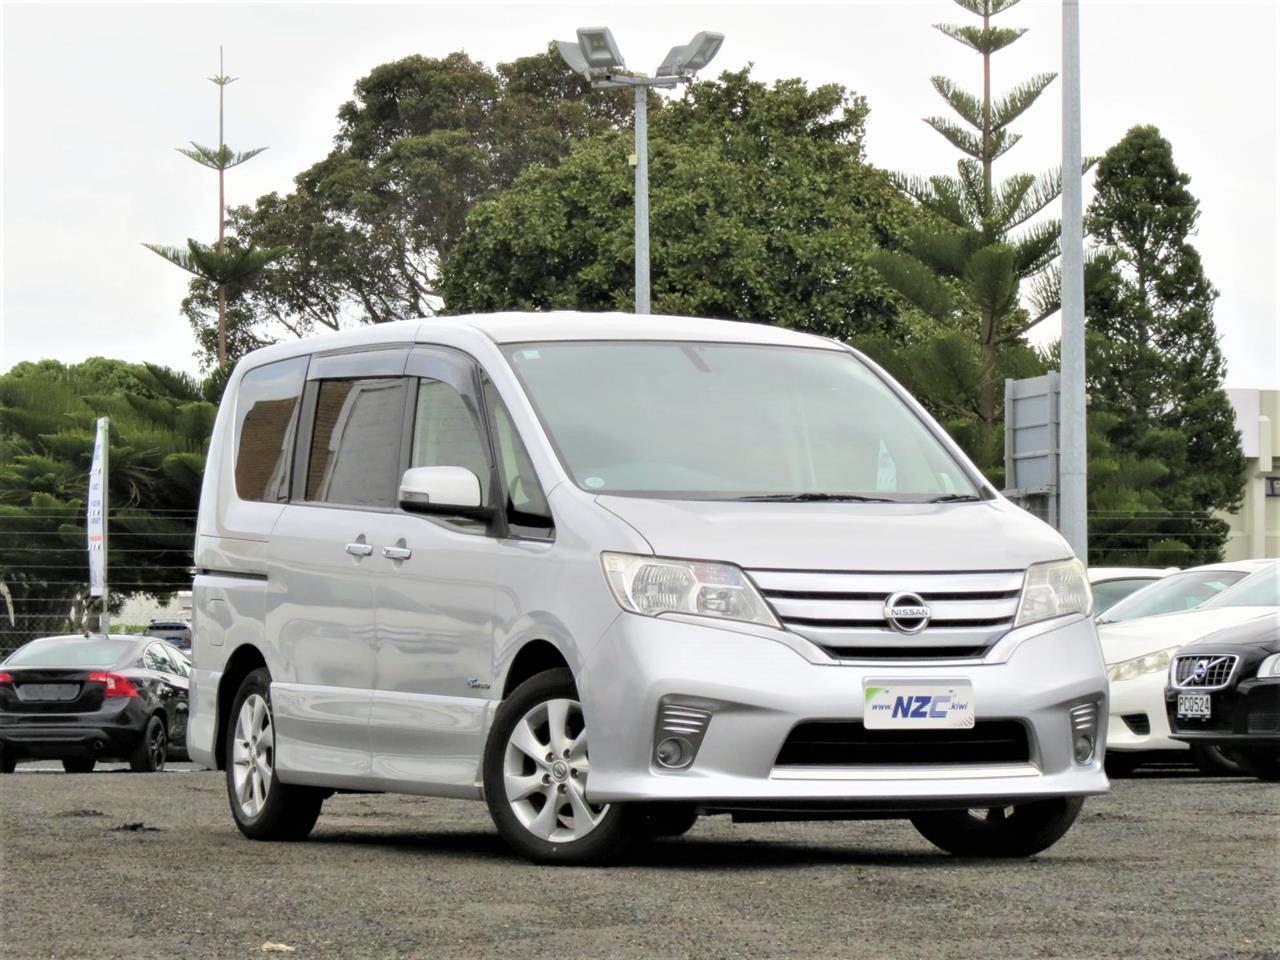 NZC 2013 Nissan Serena just arrived to Auckland